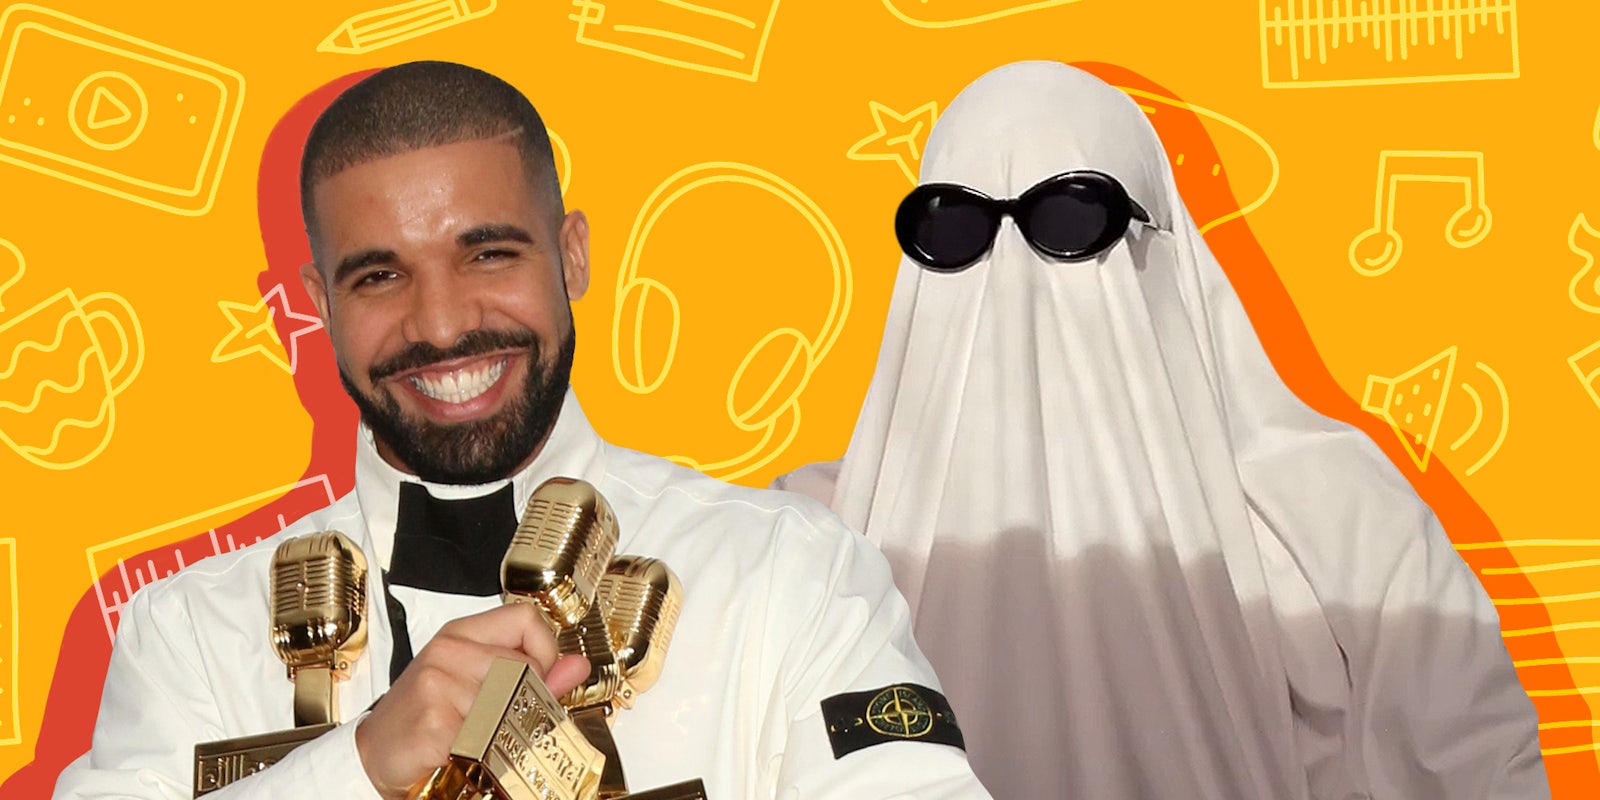 Drake and @Ghostwriter977 in front of yellow musical icon background Passionfruit Remix